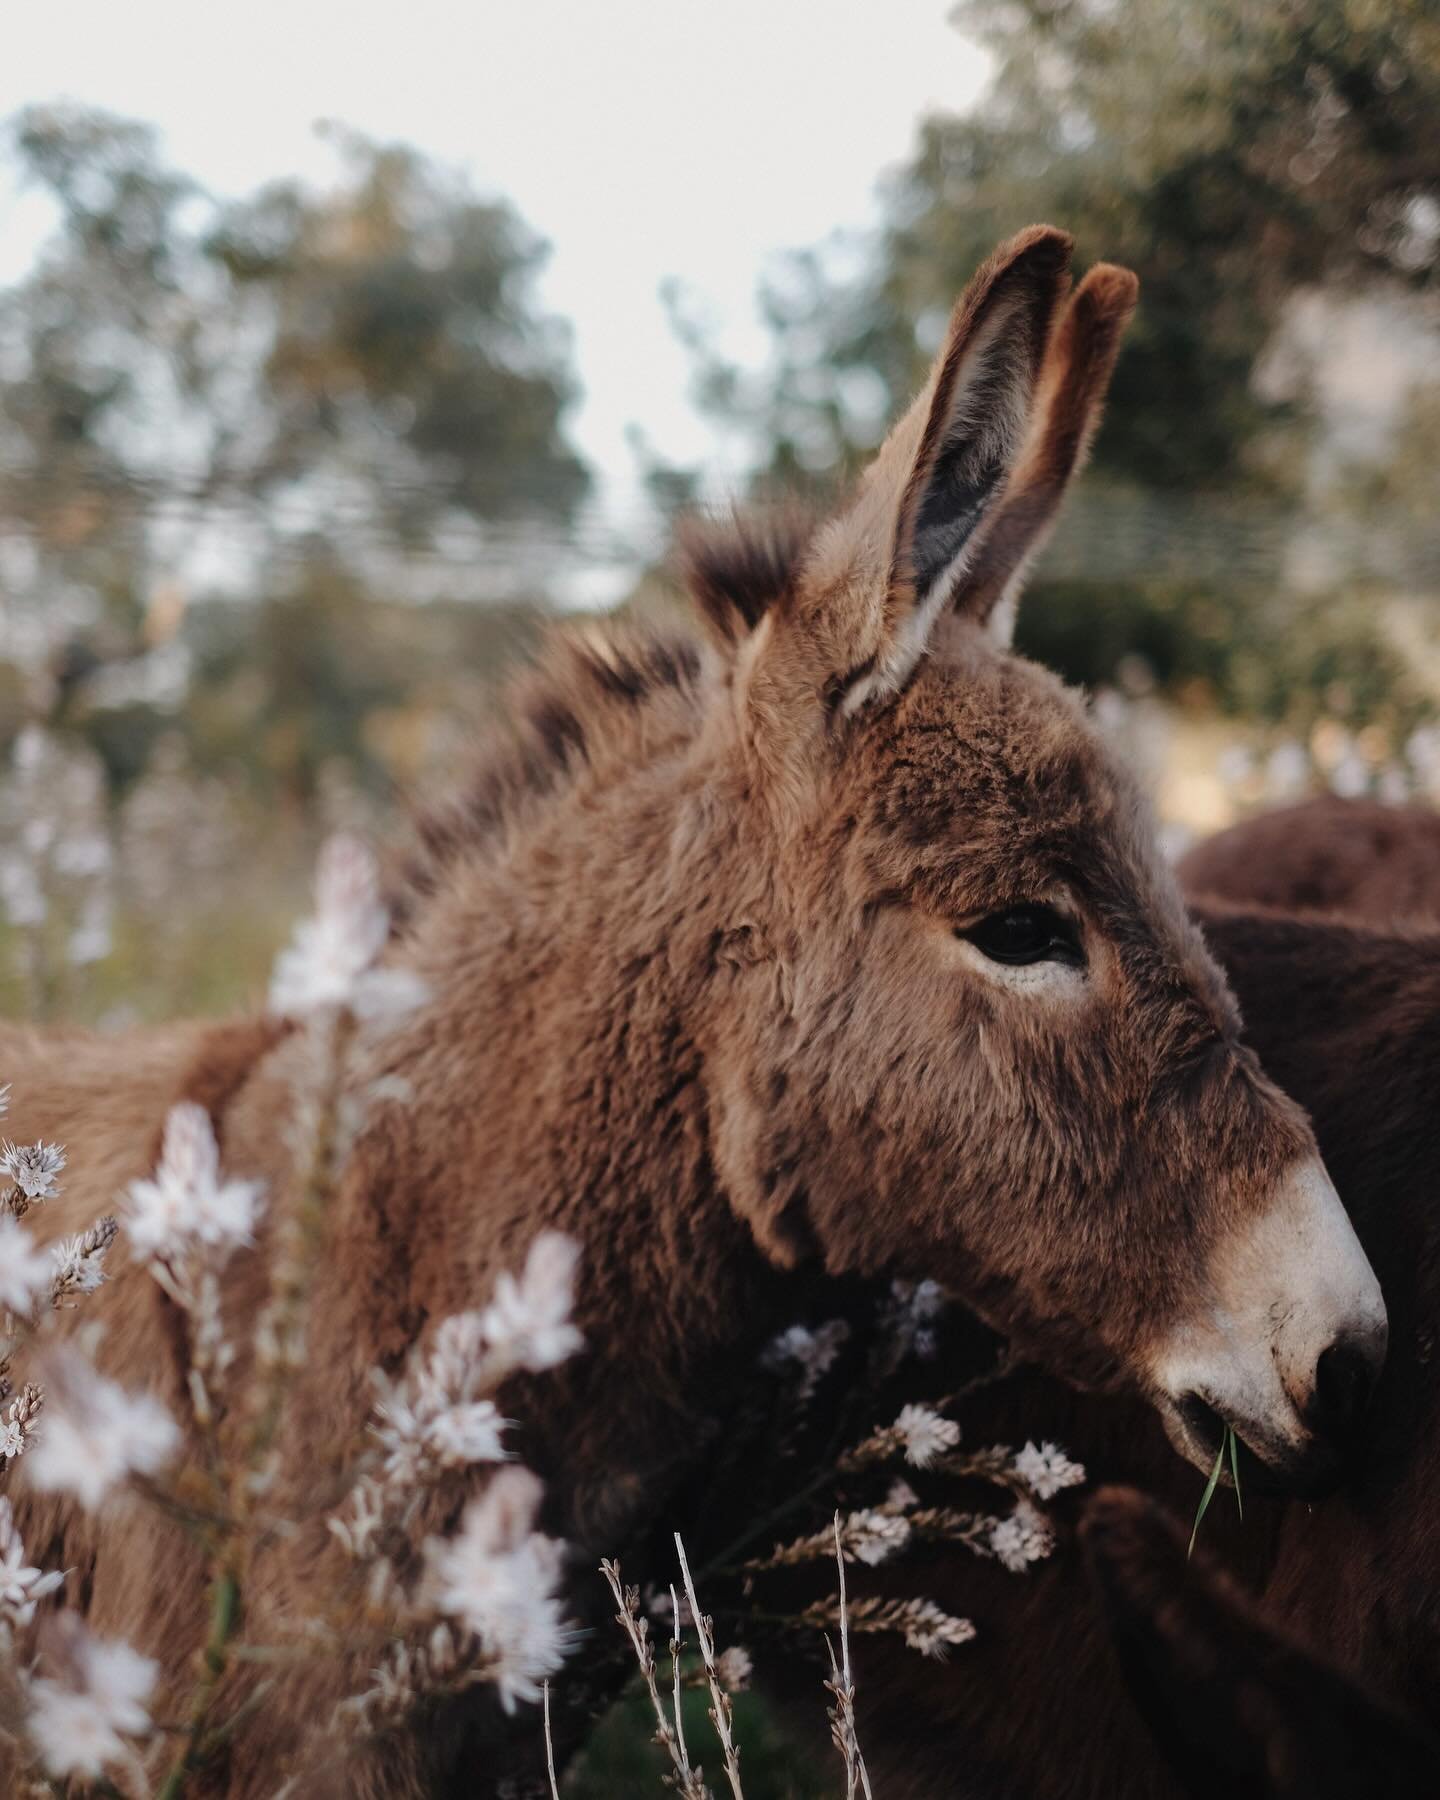 One year ago, in a Mallorcan meadow, making friends with a drove of donkeys. I&rsquo;m a little bit afraid of horses, but have a real soft spot for donkeys with their gentle nature and squawking bray.

#pursuepretty #forprettyssake #springintospring 